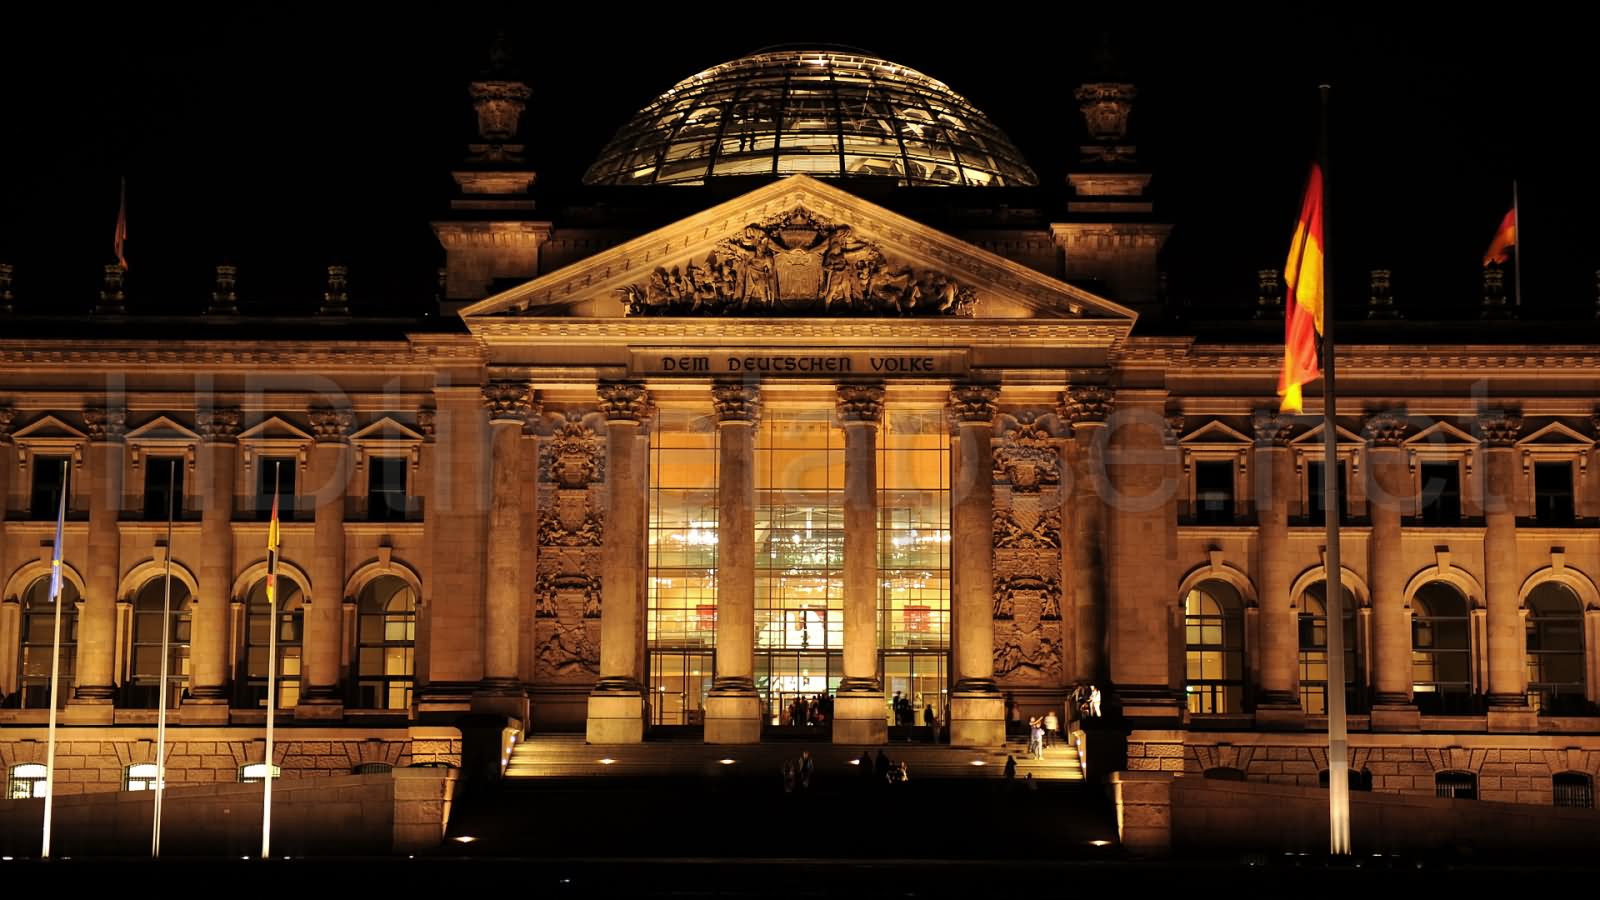 The Reichstag Building In Berlin By Night